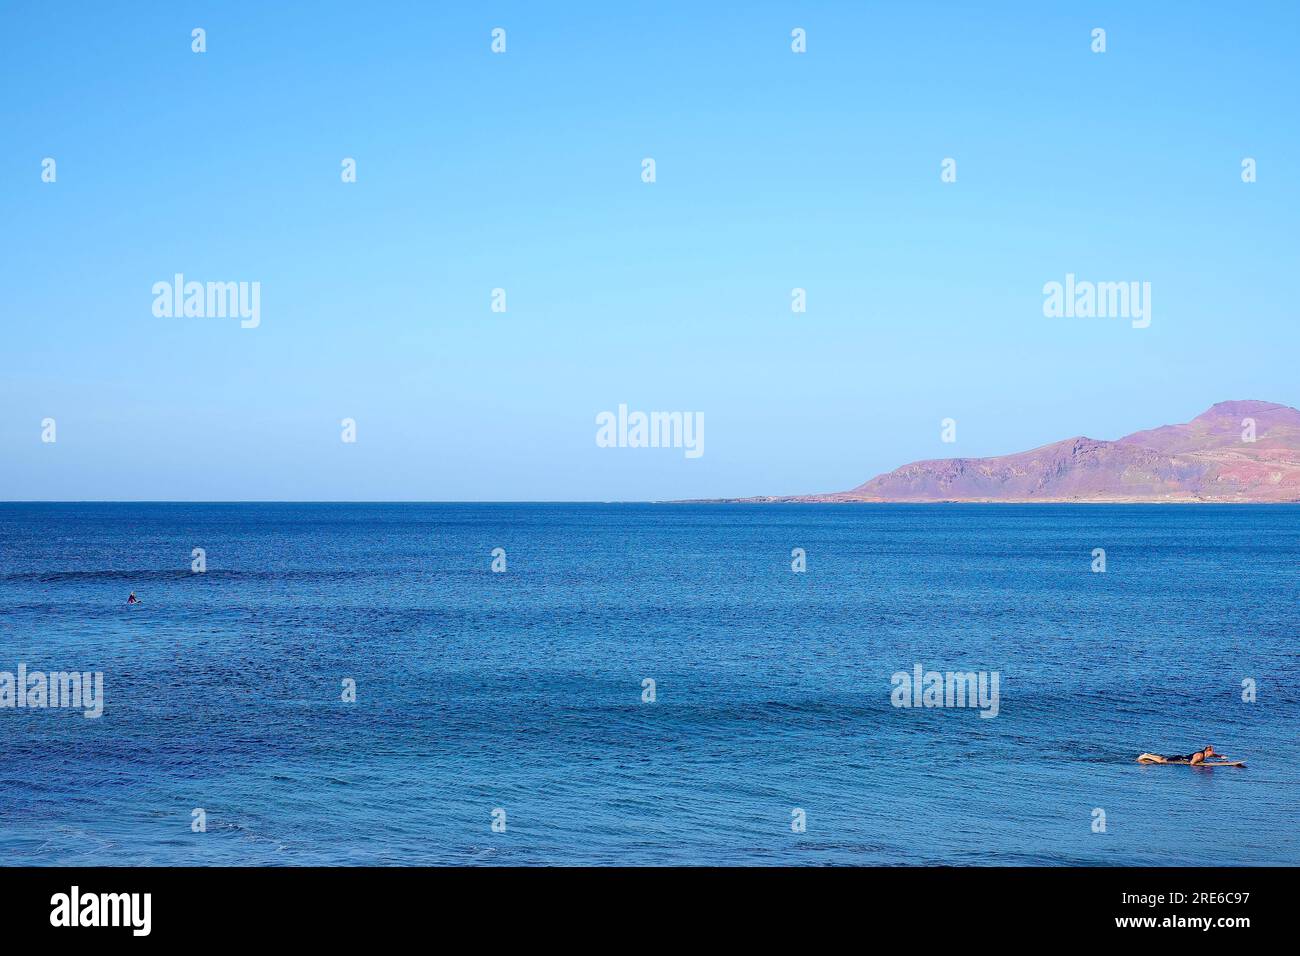 A surfer paddling the board and a vast empty blue ocean. Stock Photo